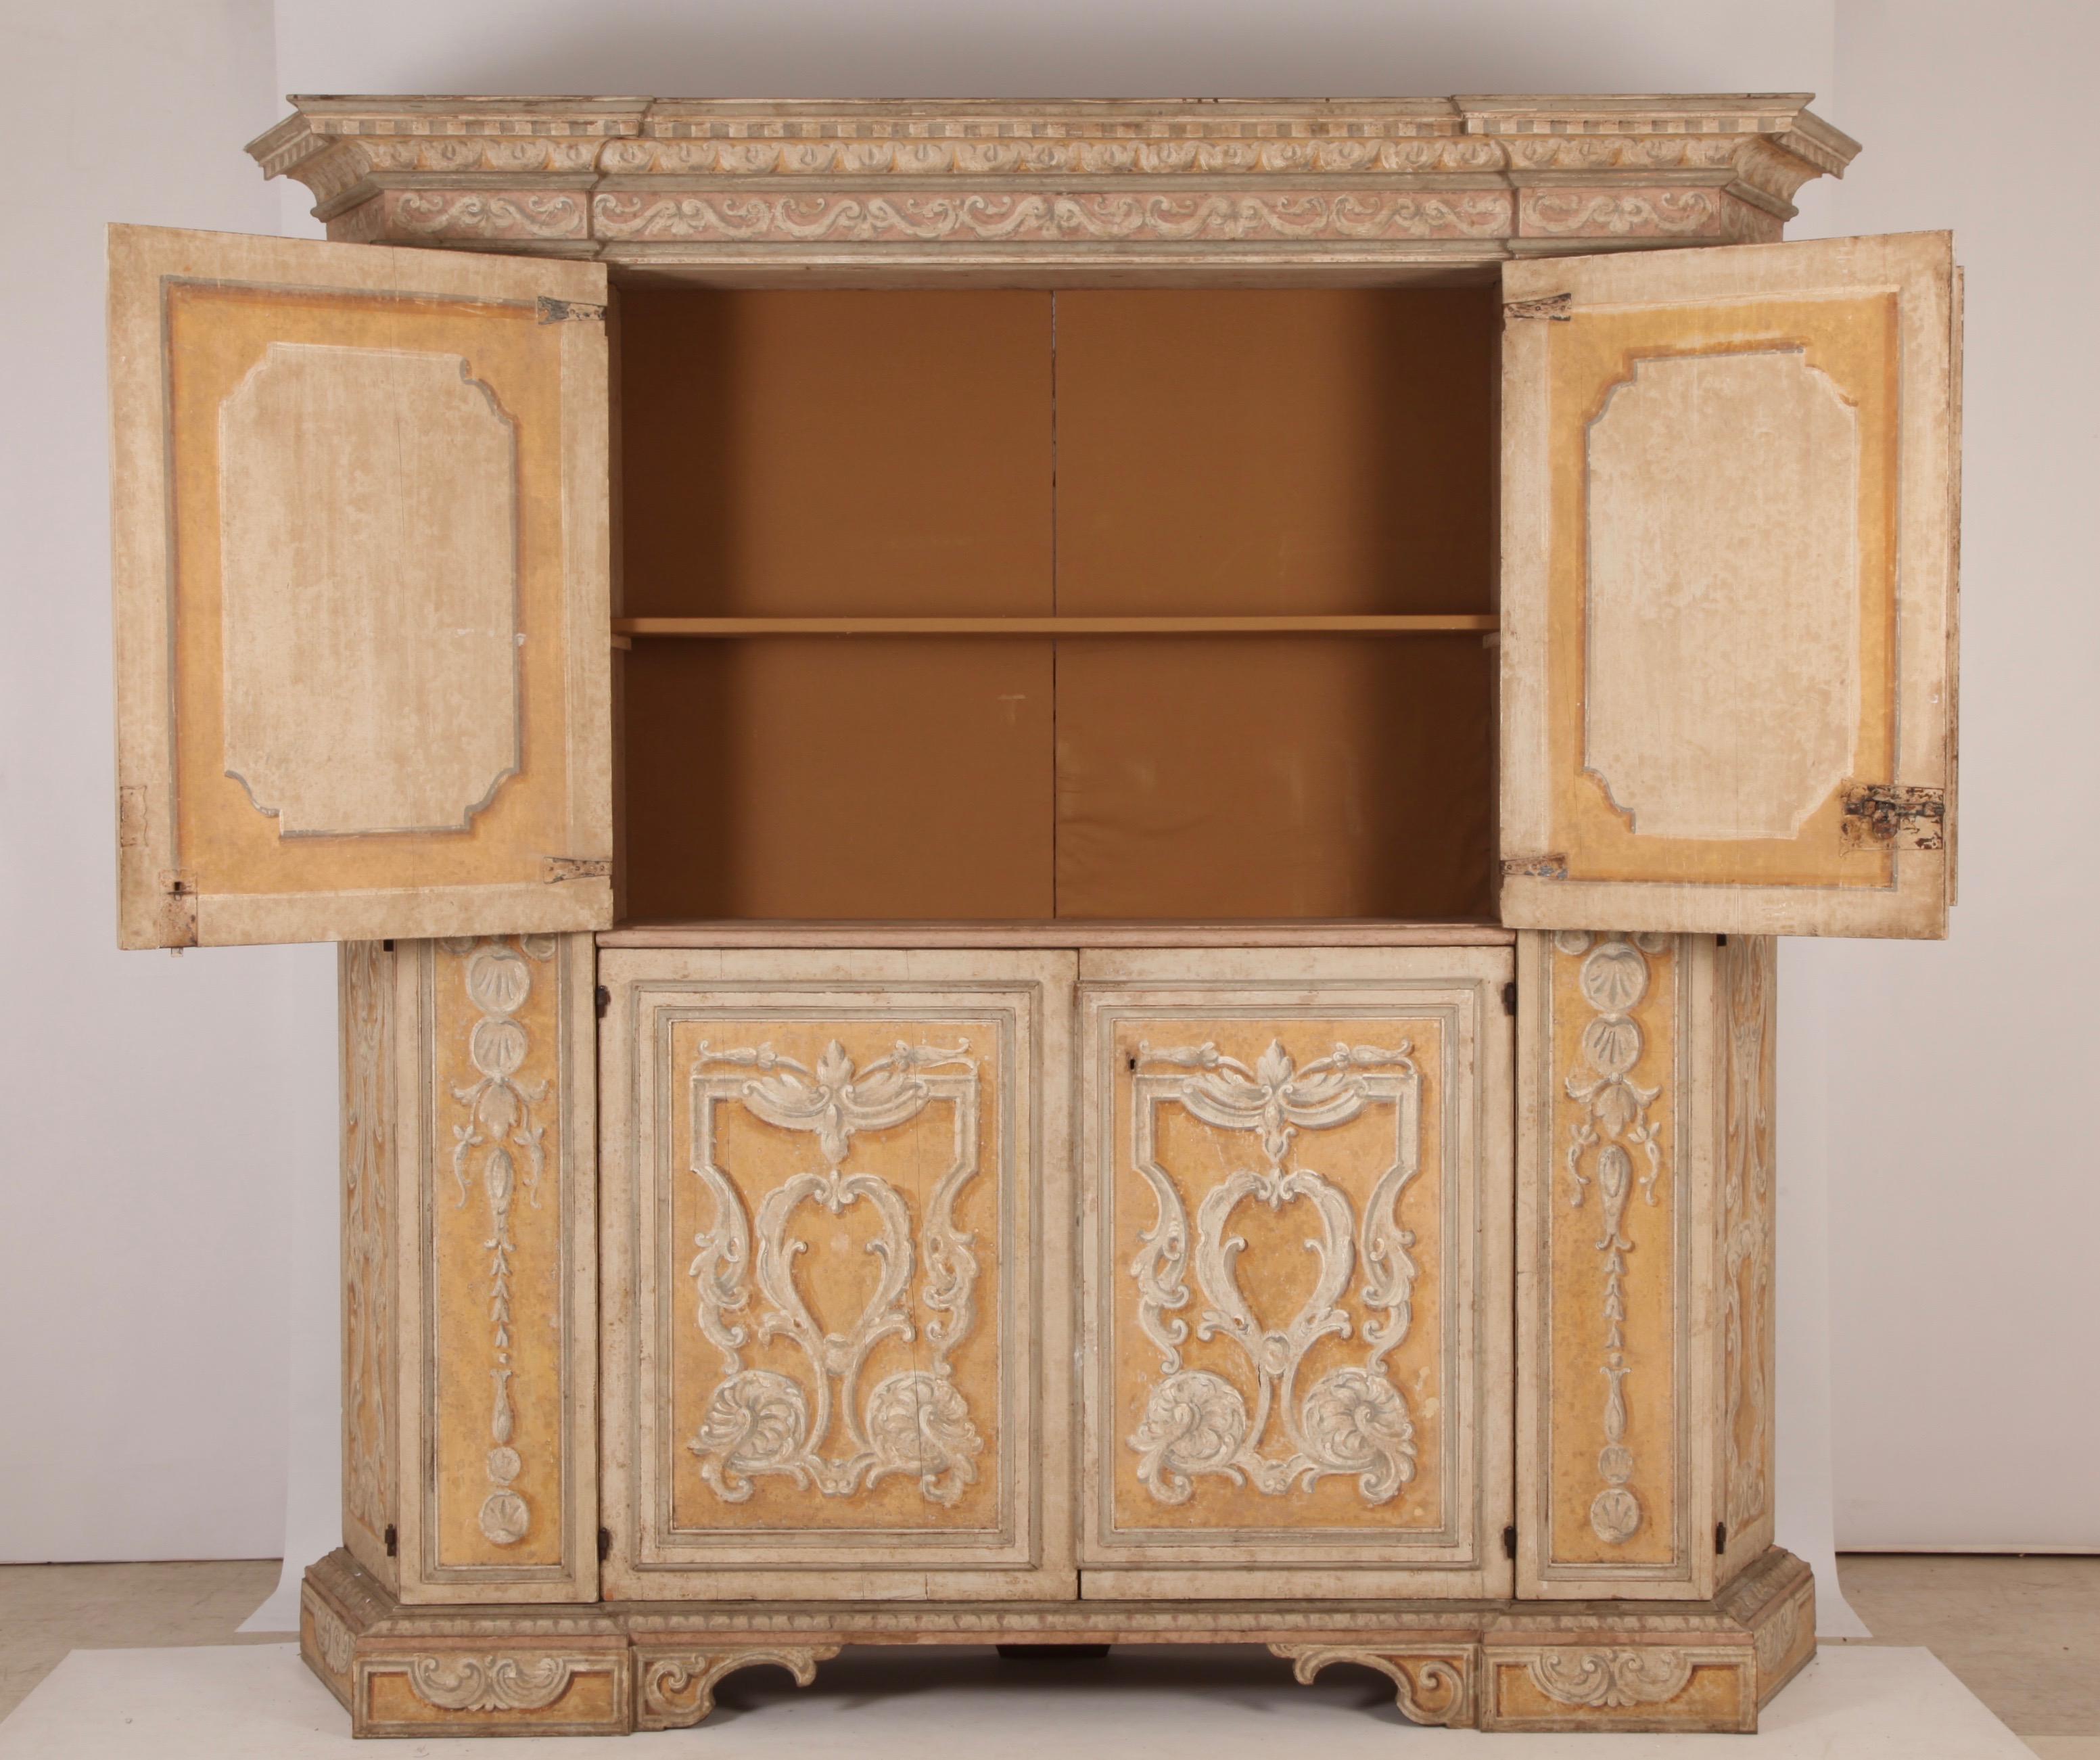 Rococo Revival Antique Italian Painted Cabinet from Tuscany